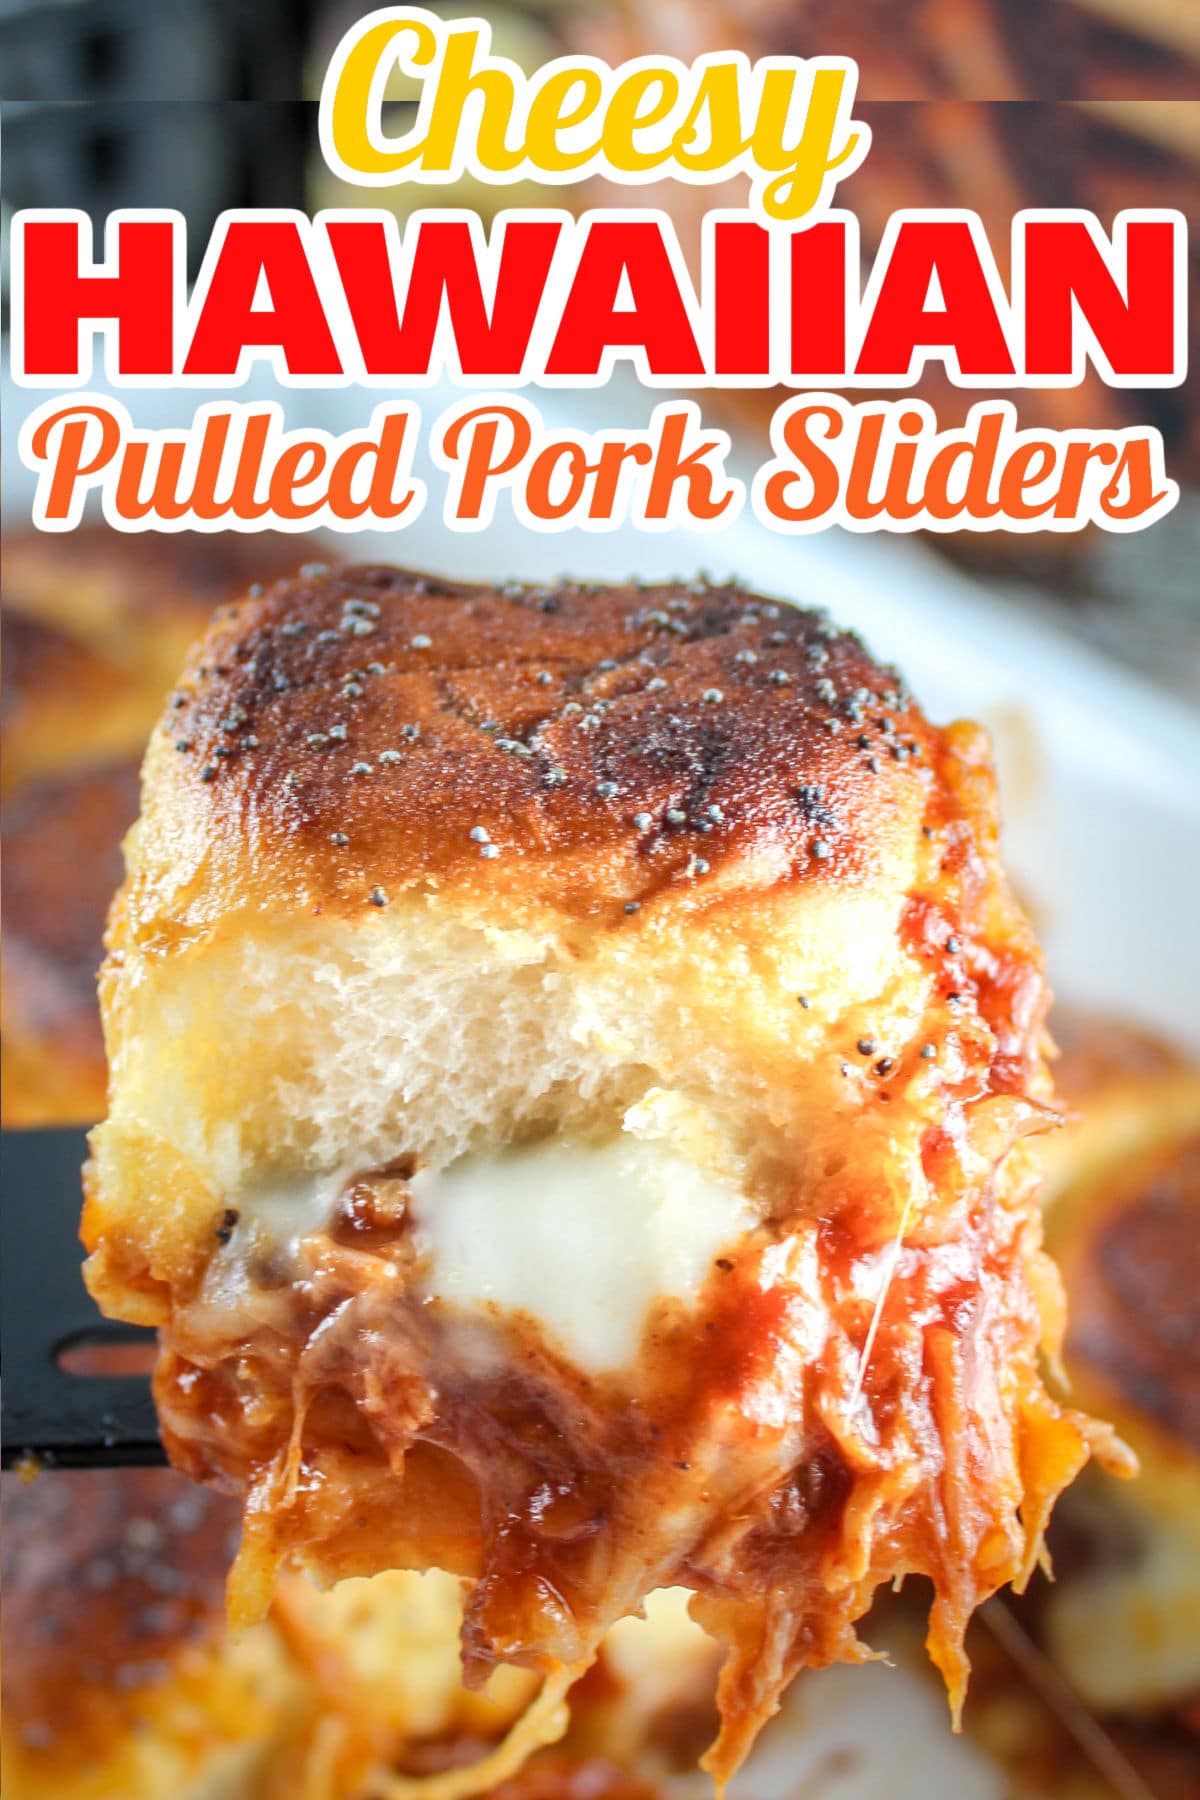 These slow cooker Hawaiian Pulled Pork Sliders are packed with flavor and ready-in-minutes. Grab some pre-made pulled pork and a pack of my favorite Hawaiian rolls and you'll have a game-day snack that everybody will love! (It's also great for a weeknight meal - ready in 30 minutes!) via @foodhussy